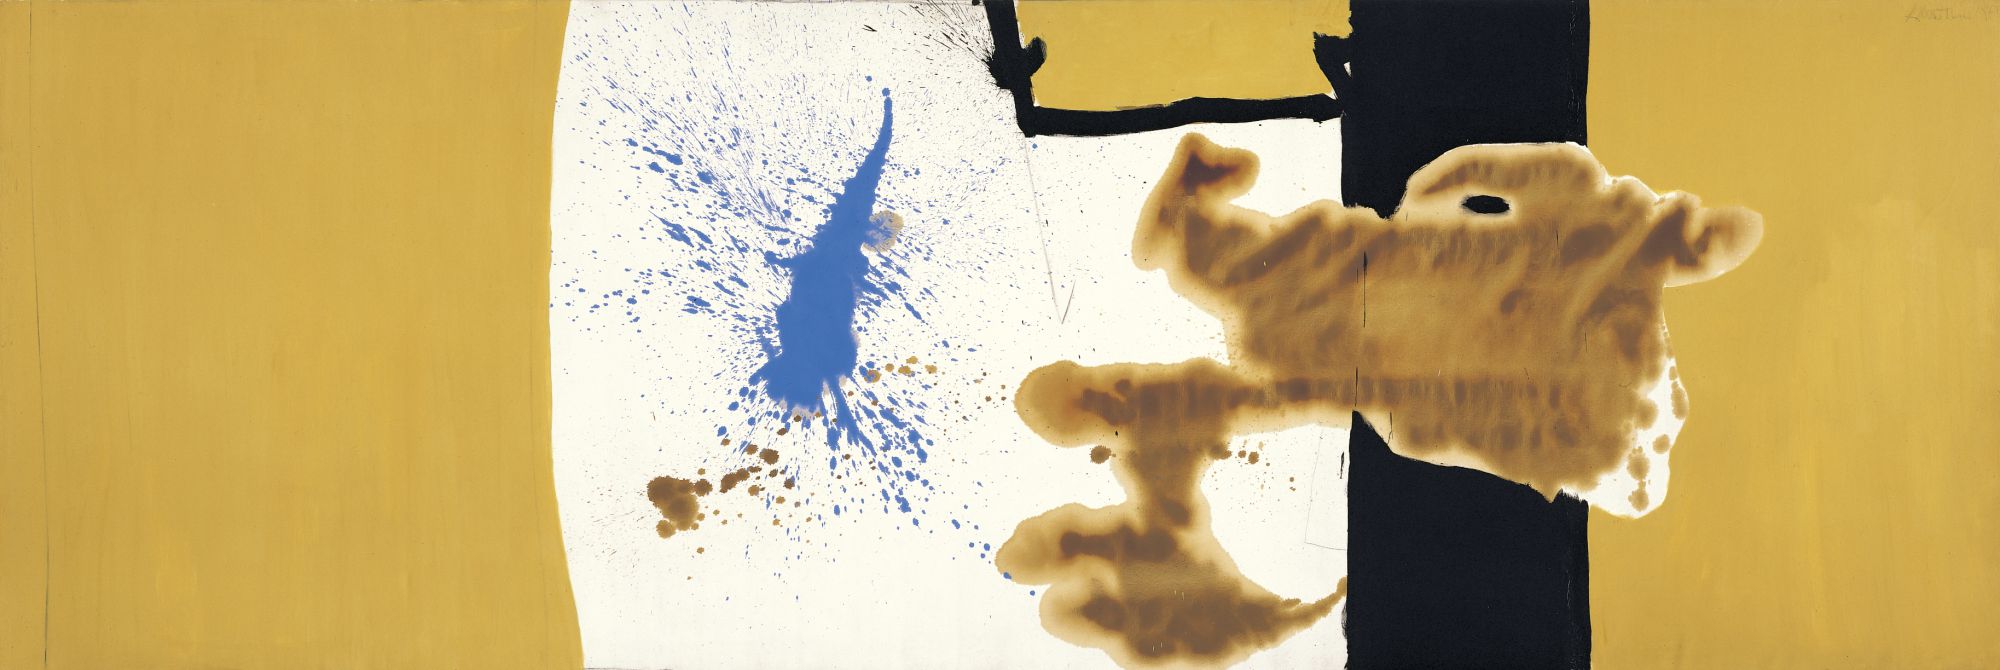 The Voyage: Ten Years After, 1960–1961/1962. Oil and charcoal on canvas, 68 ¾ x 205 2/4 inches (174.6 x 522.6 cm)